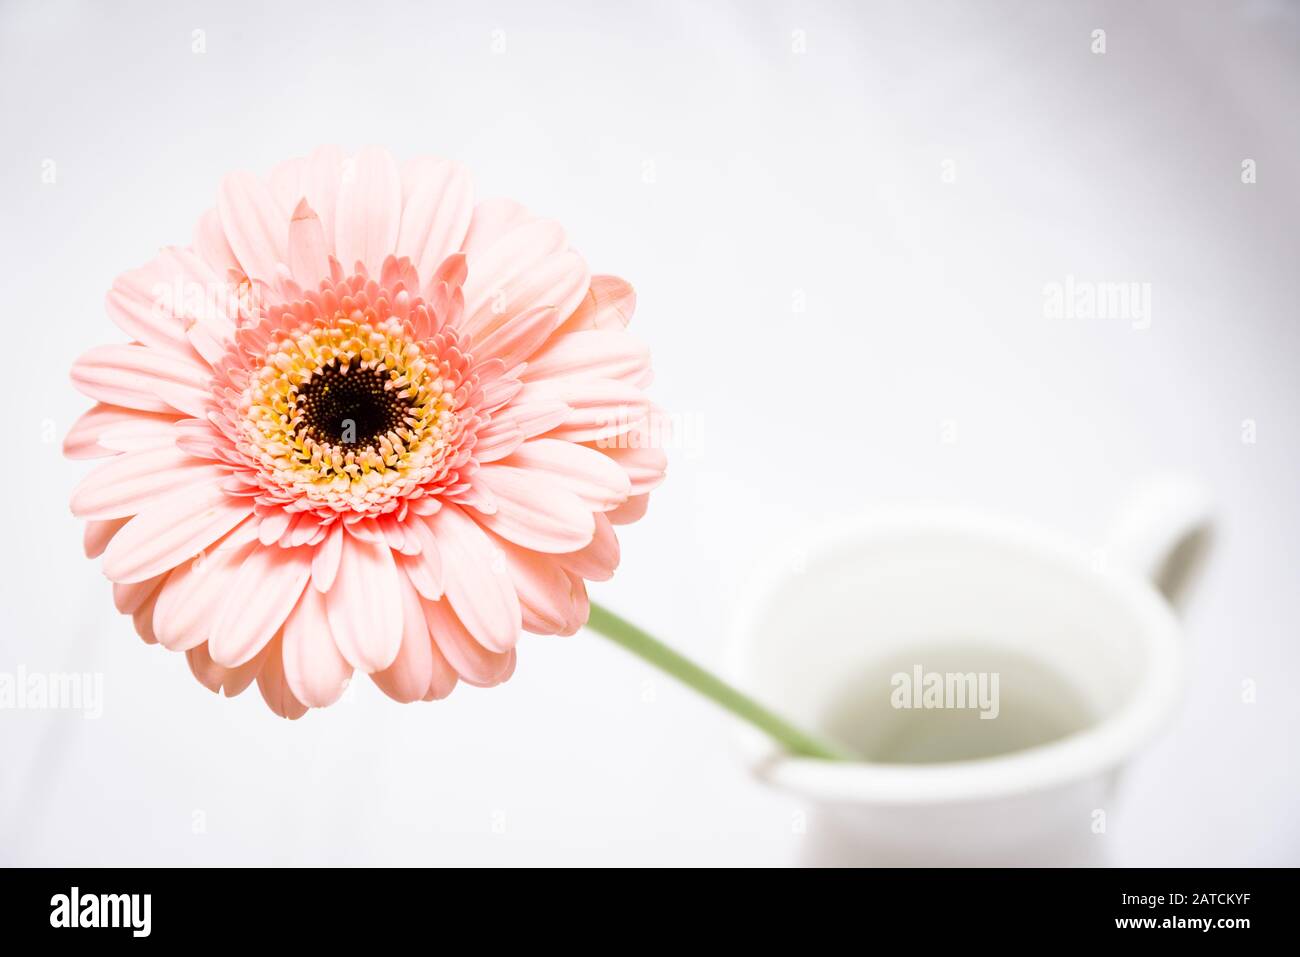 Macro Photo of a Vibrant Pink Gerbera Daisy in a Vase Against a White Background Stock Photo